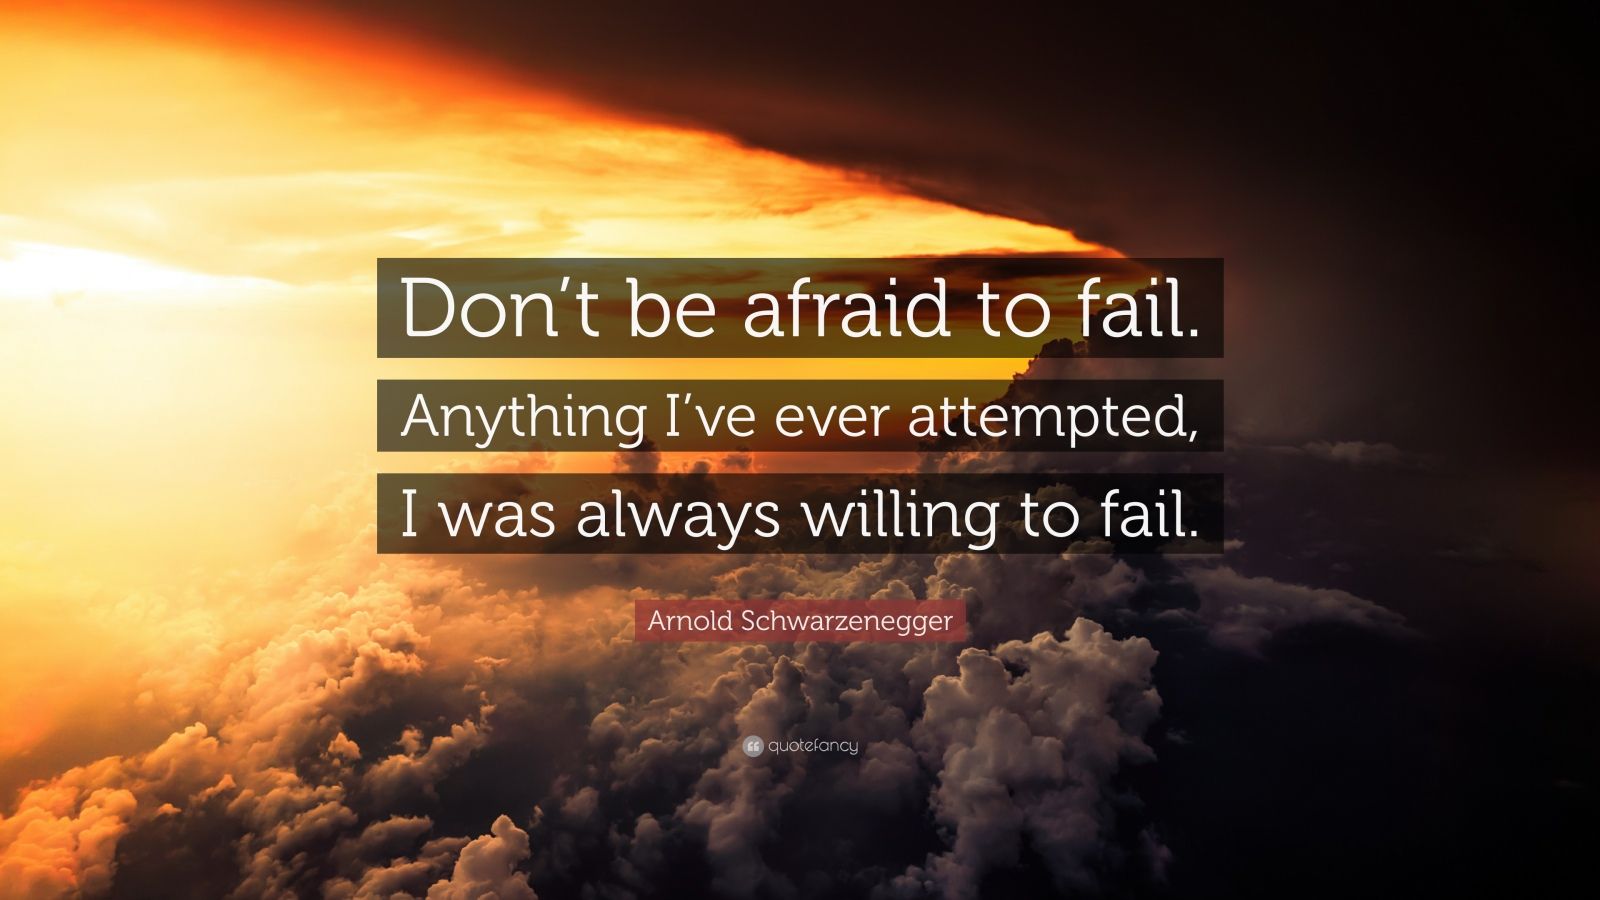 Arnold Schwarzenegger Quote: “Don’t be afraid to fail. Anything I’ve ...